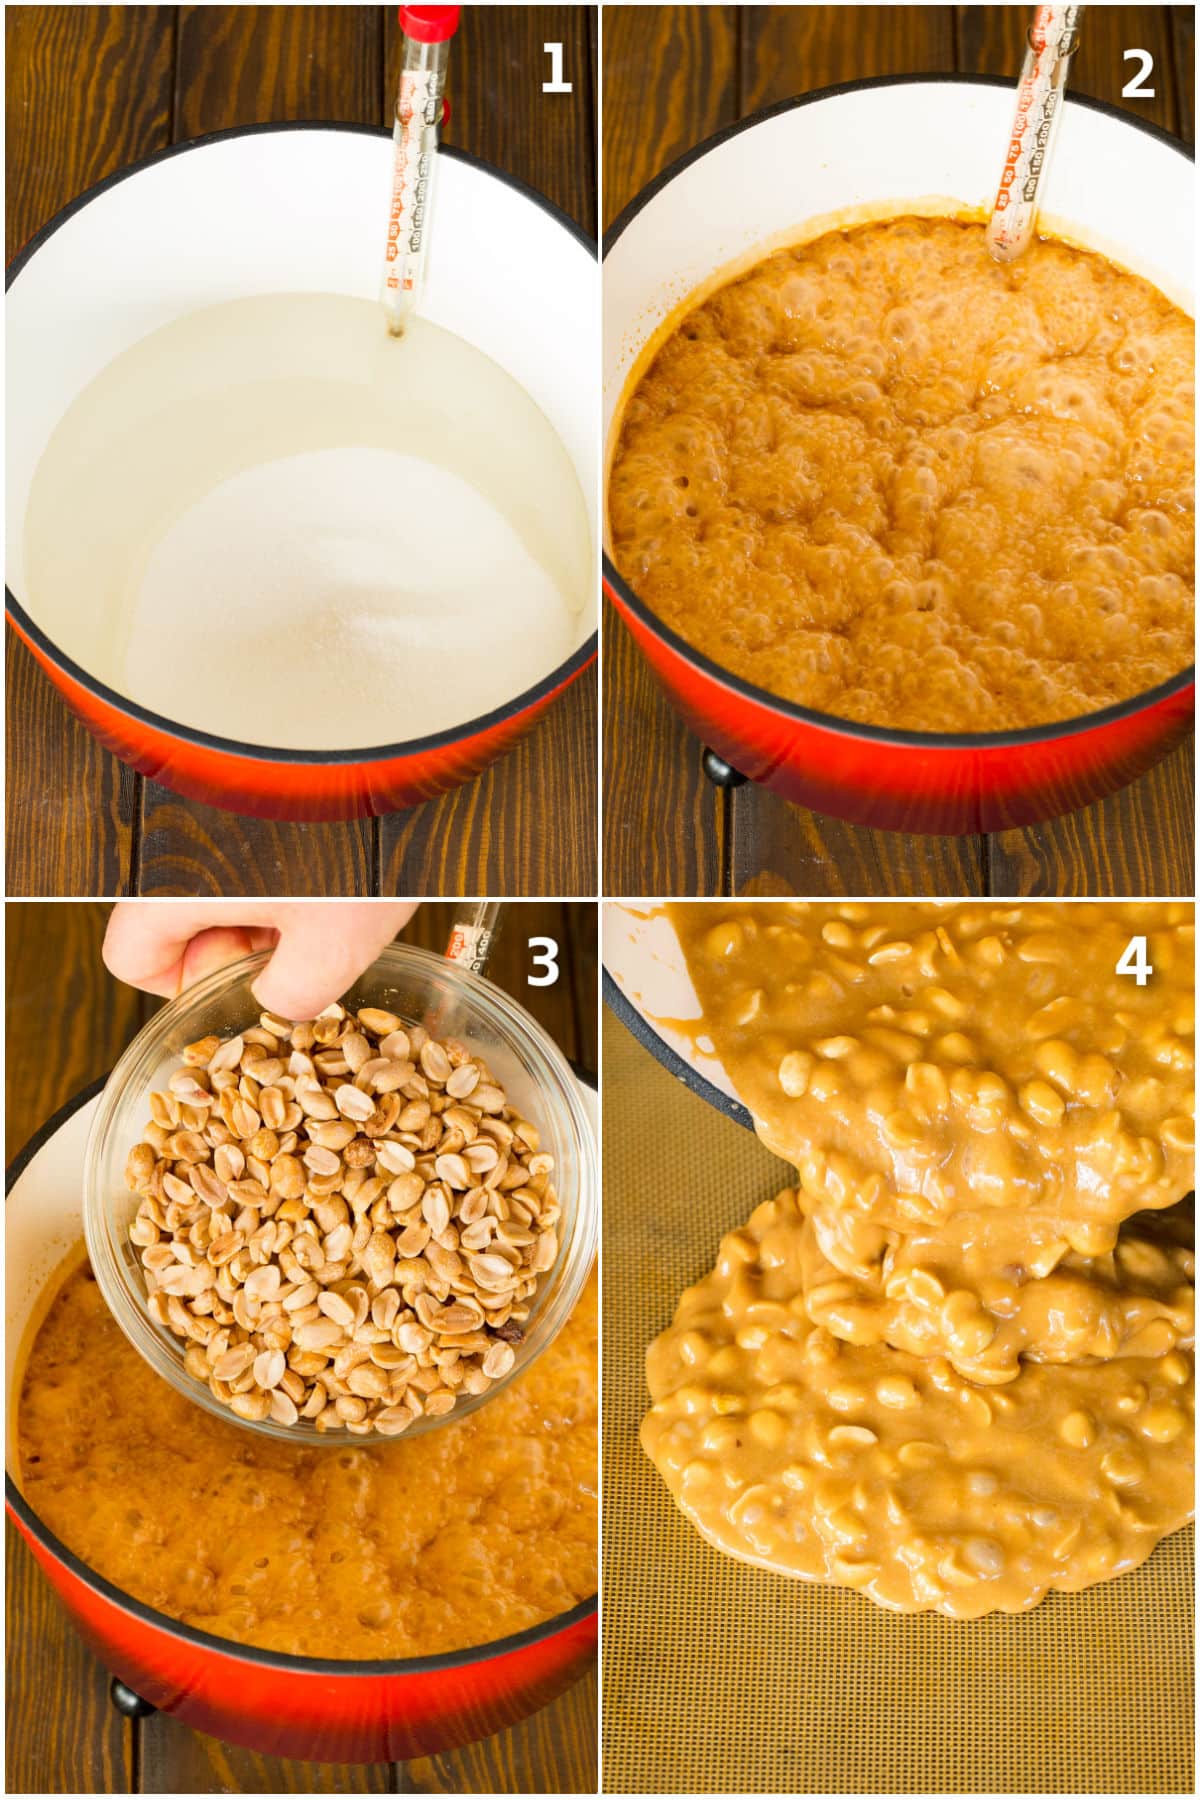 Process shots showing how to make peanut brittle.